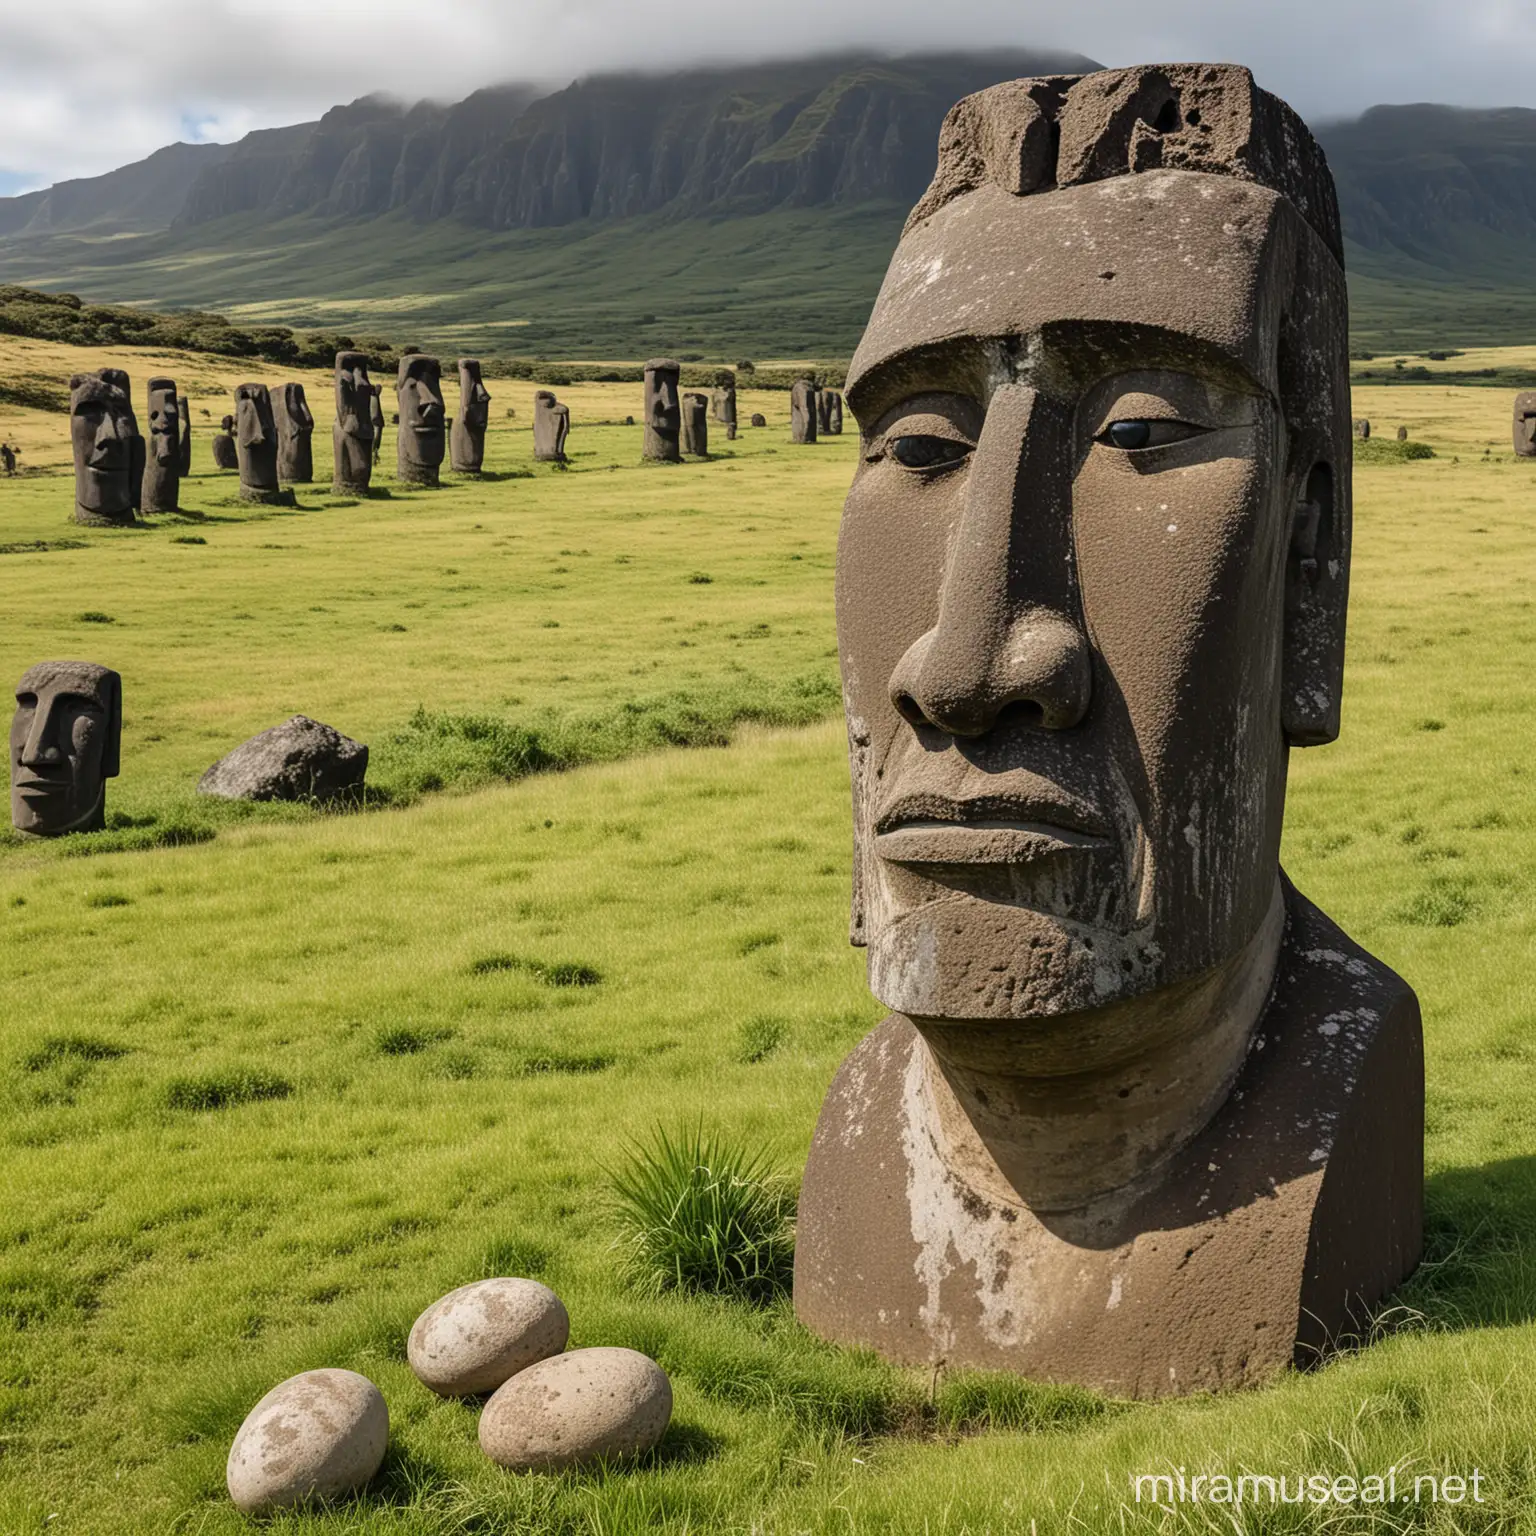 
a moai with a stone head and eggs rolled near it